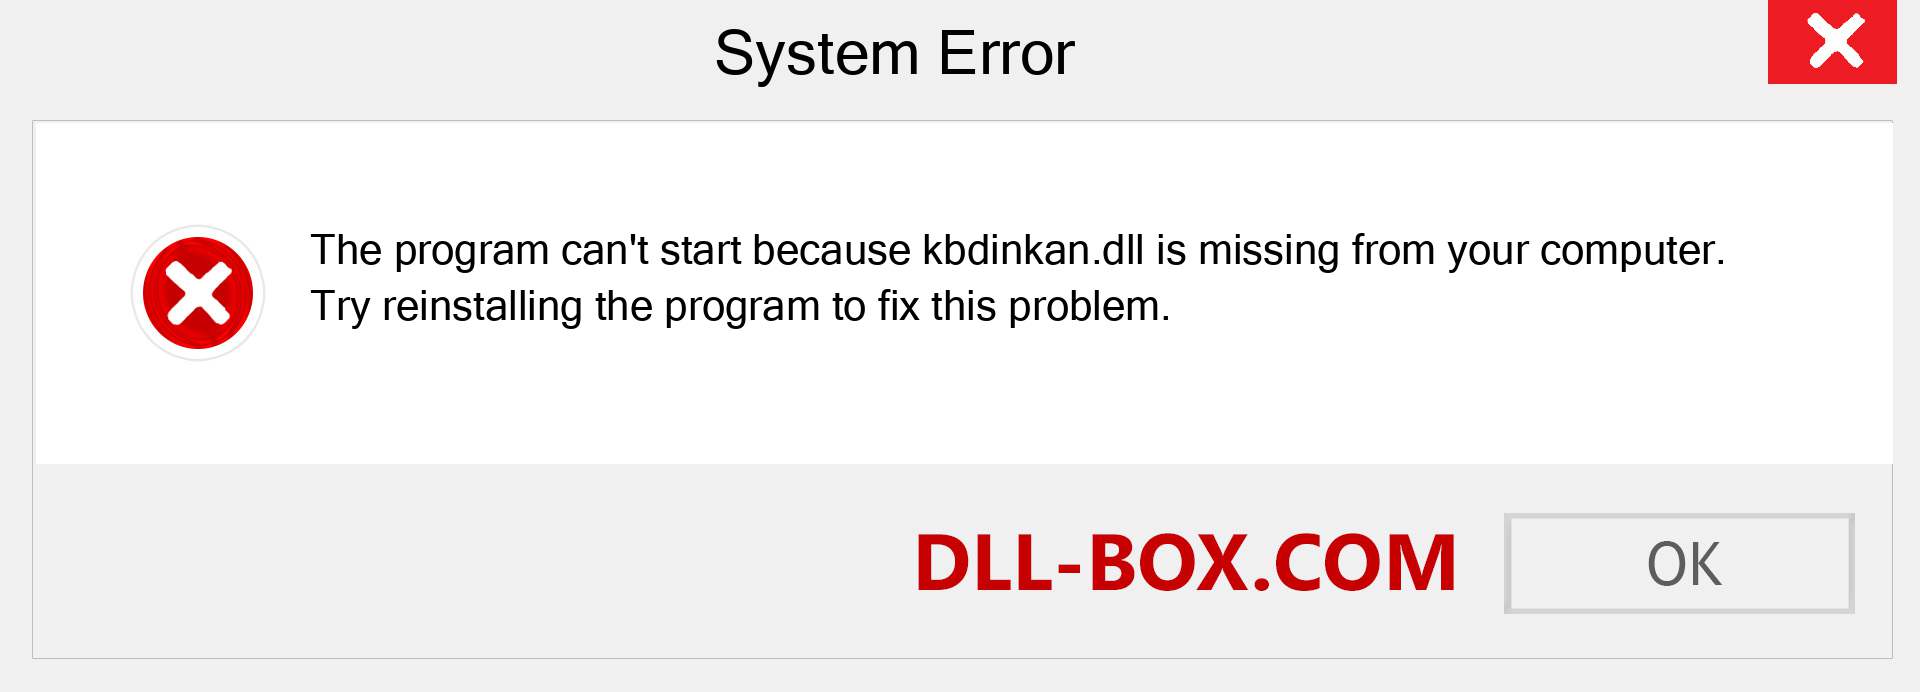  kbdinkan.dll file is missing?. Download for Windows 7, 8, 10 - Fix  kbdinkan dll Missing Error on Windows, photos, images